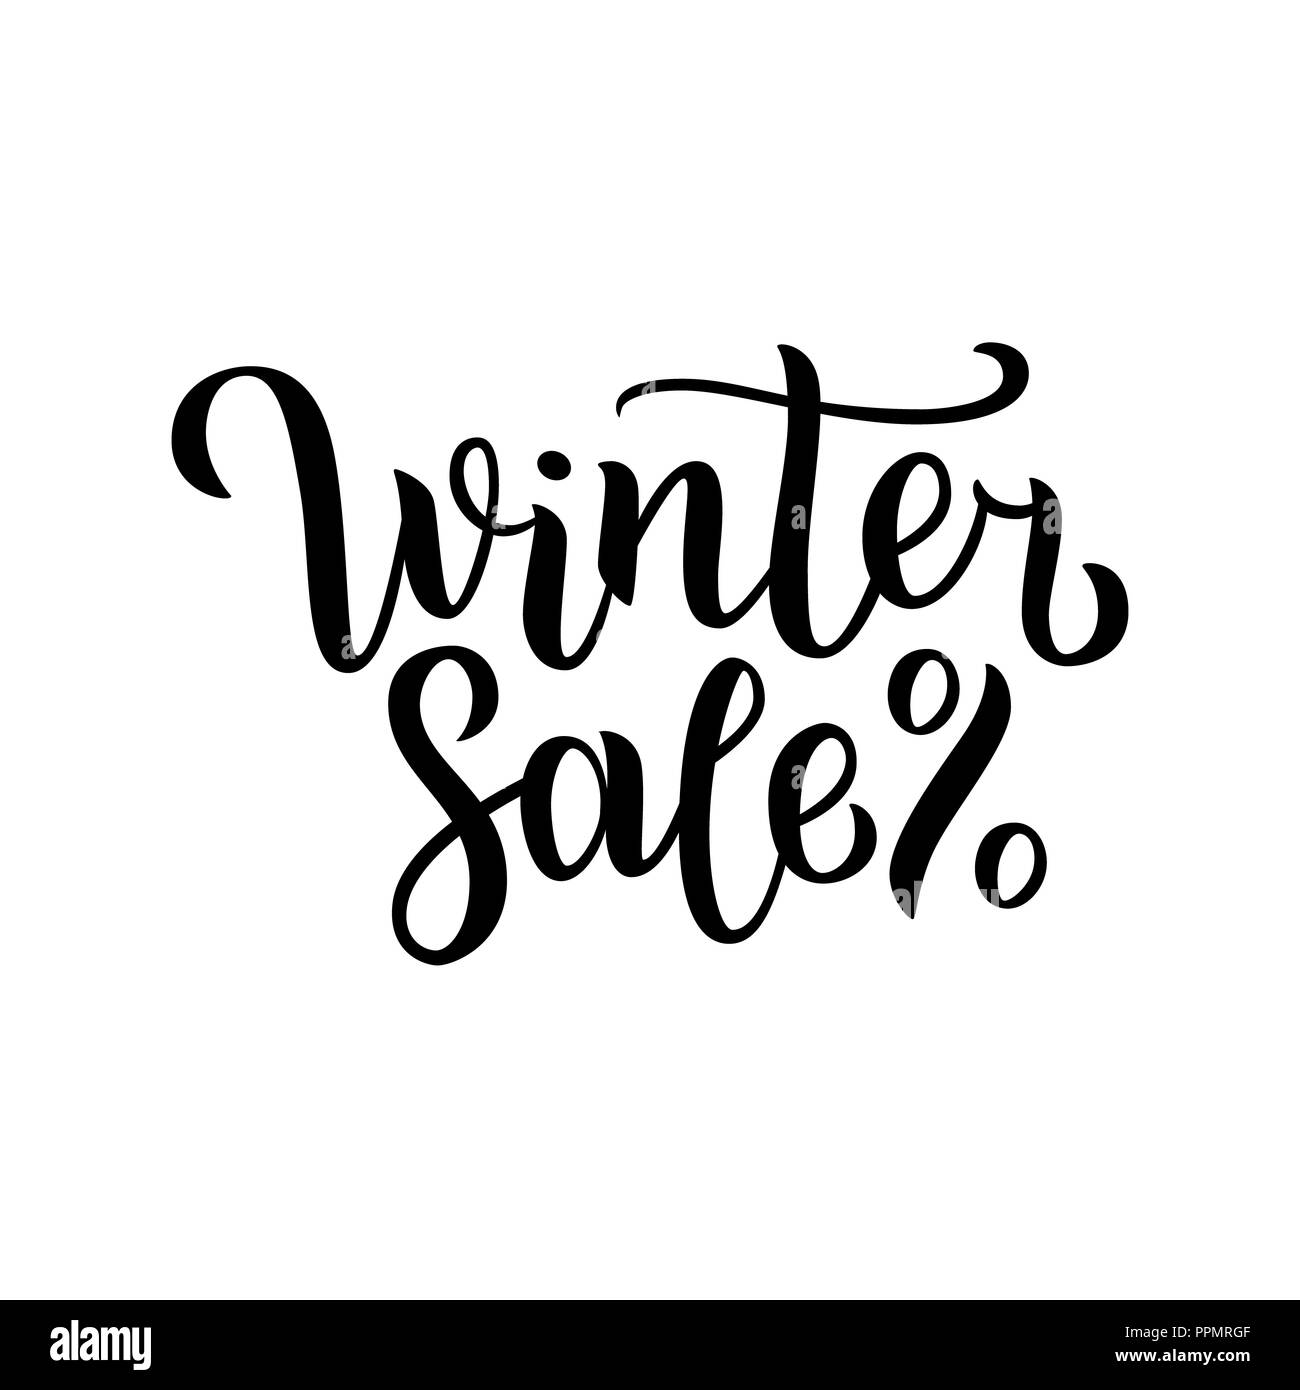 Winter sale hand written inscription with isolated on white background.  illustration. Lettering. Postcard for winter season advertising. Stock Photo